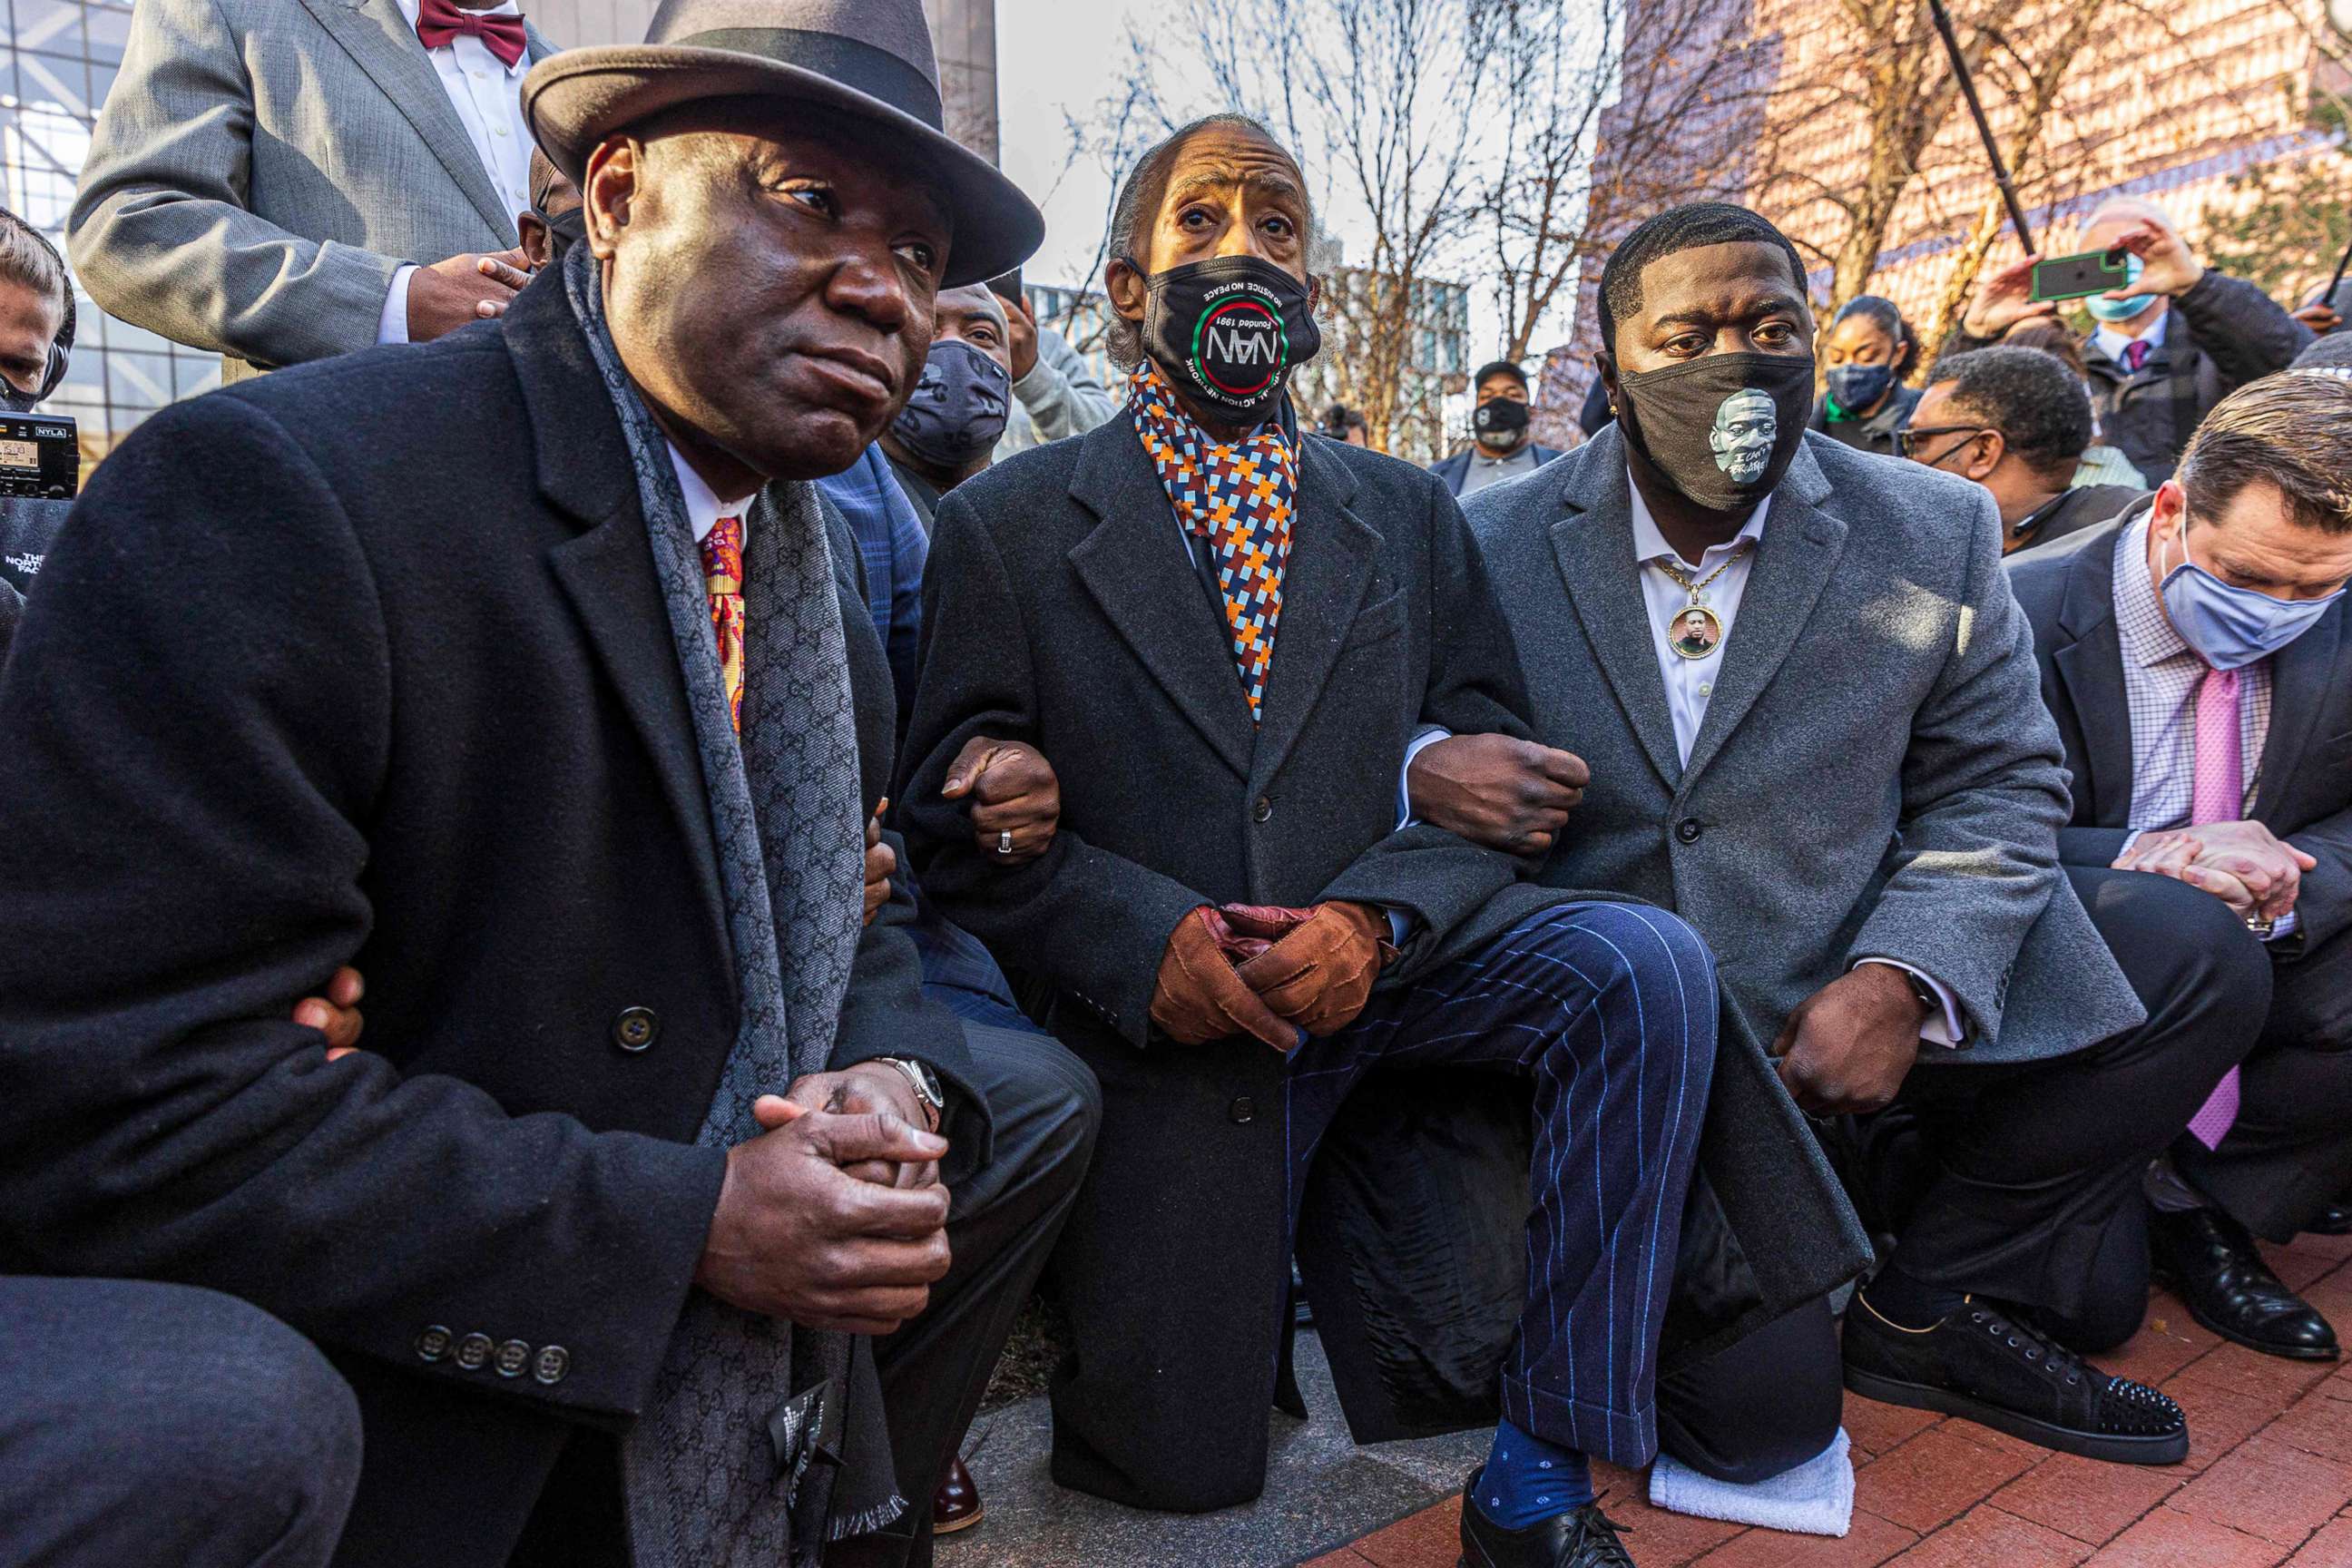 PHOTO: Floyd family lawyer, Attorney Ben Crump, left,and Rev. Al Sharpton, the founder and President of National Action Network,center, and George Floyd's brother kneel on March 29, 2021 in Minneapolis.